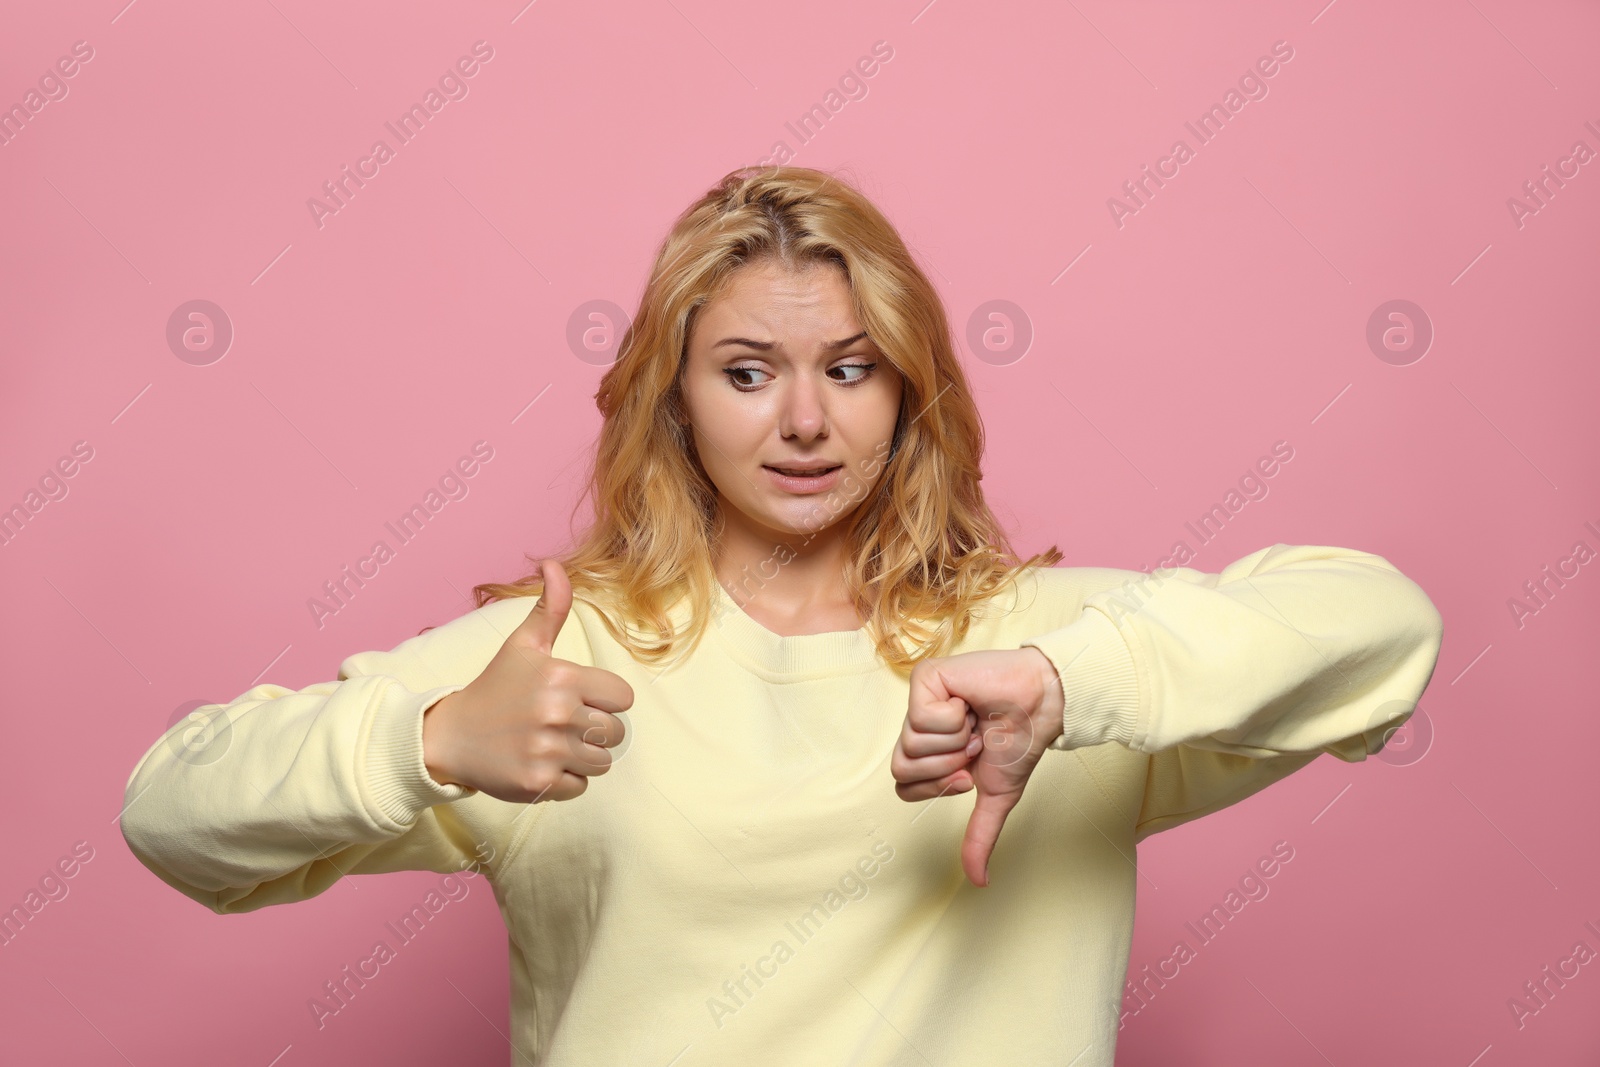 Photo of Conflicted young woman showing thumbs up and down gestures on pink background